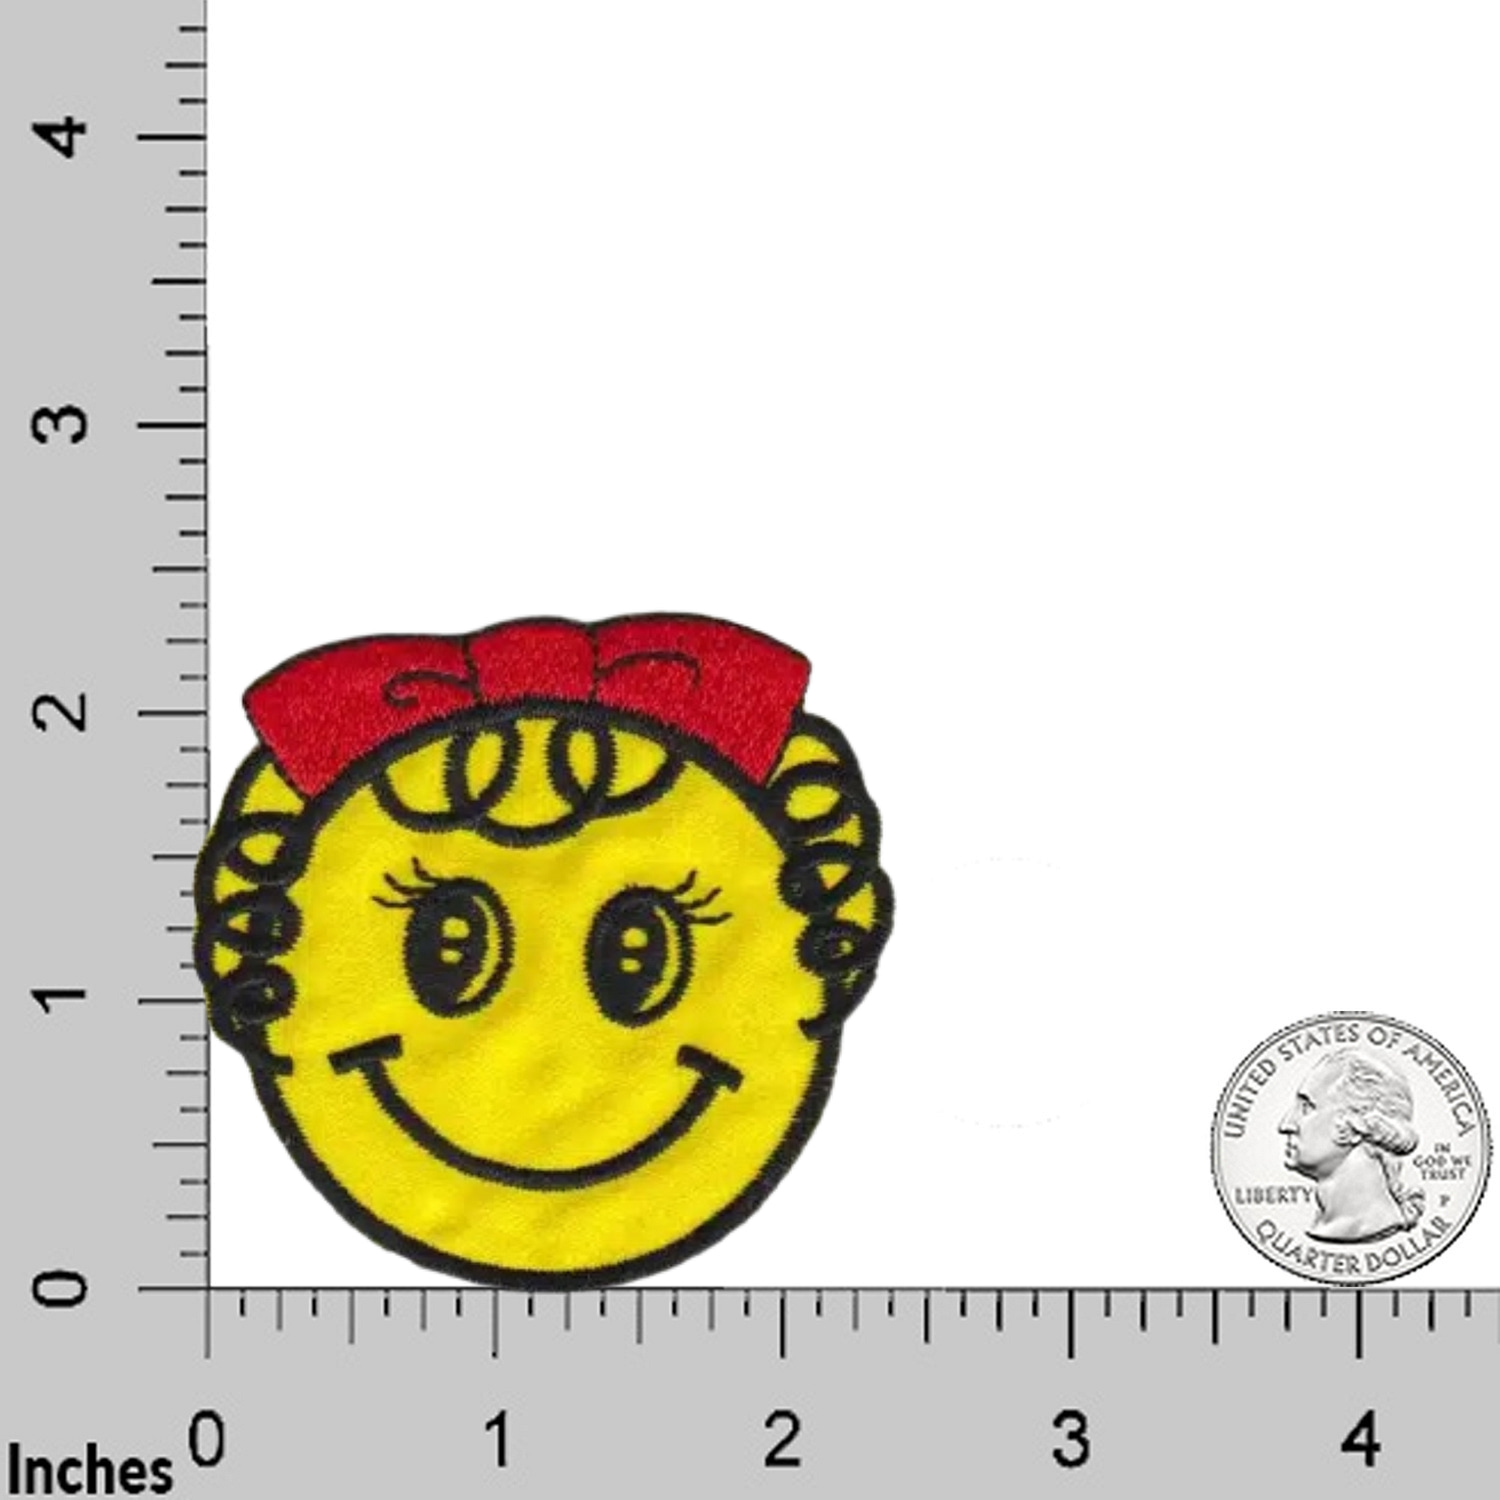 Happy Face Rainbow Daisy Embroidered Flower Patch Applique